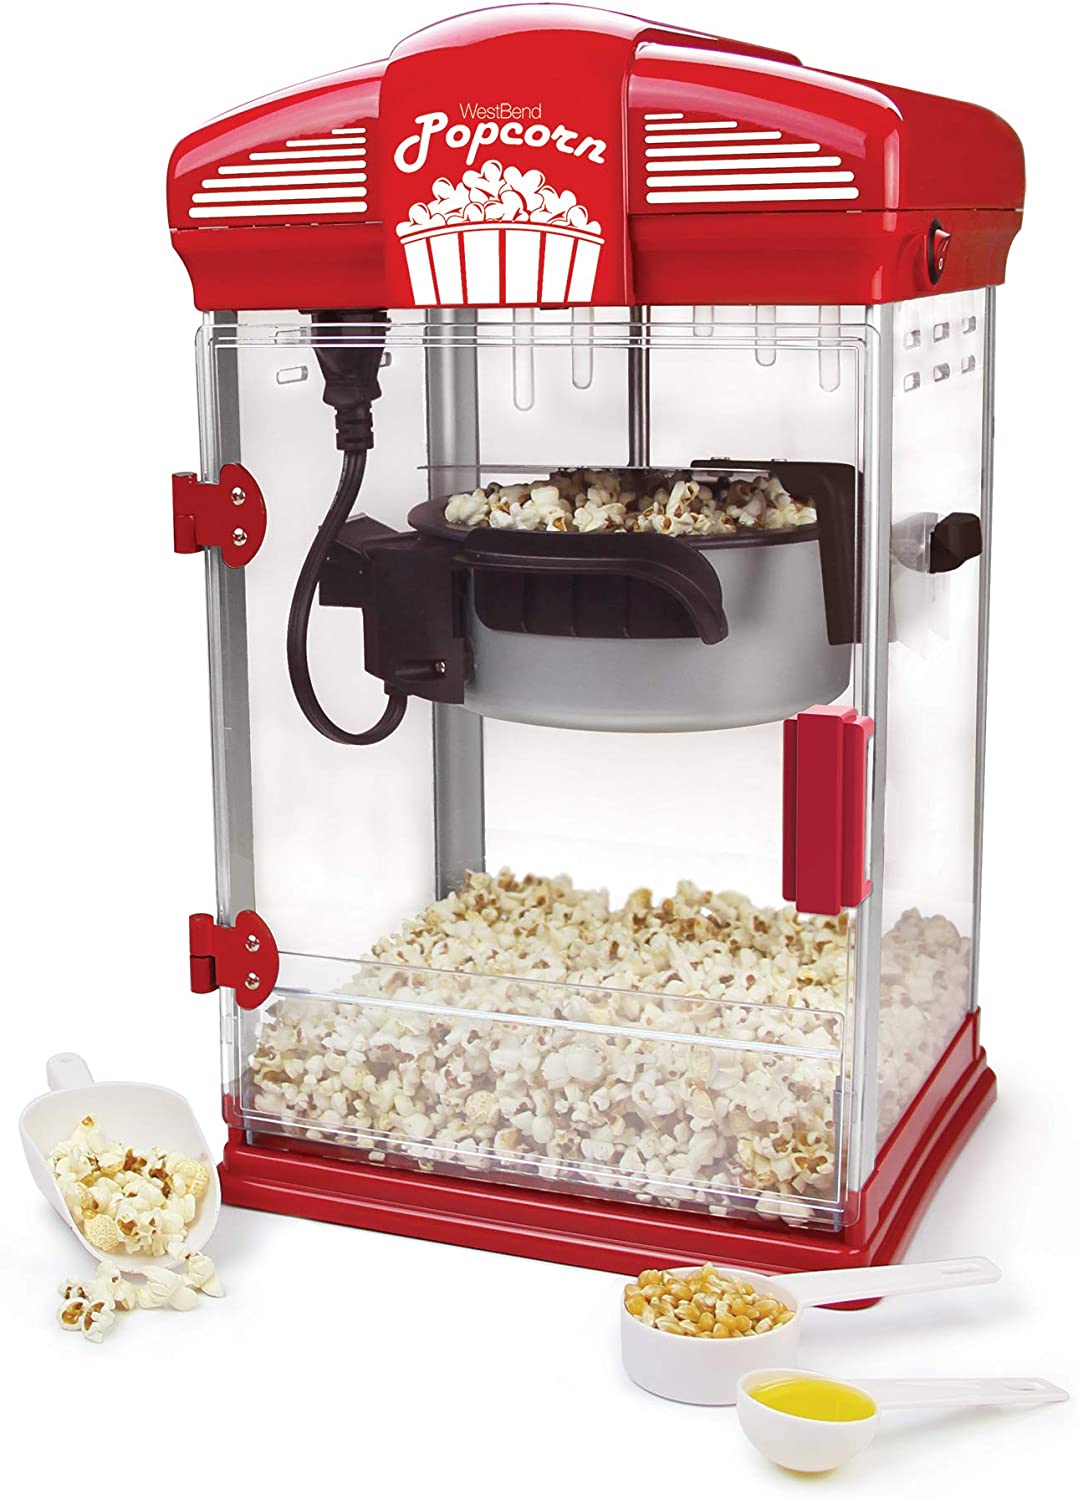 West Bend Hot Oil Theater Style Popcorn Popper Machine with Nonstick Kettle Includes Measuring Tool and Serving Scoop, 4-Ounce, Red - image 1 of 3